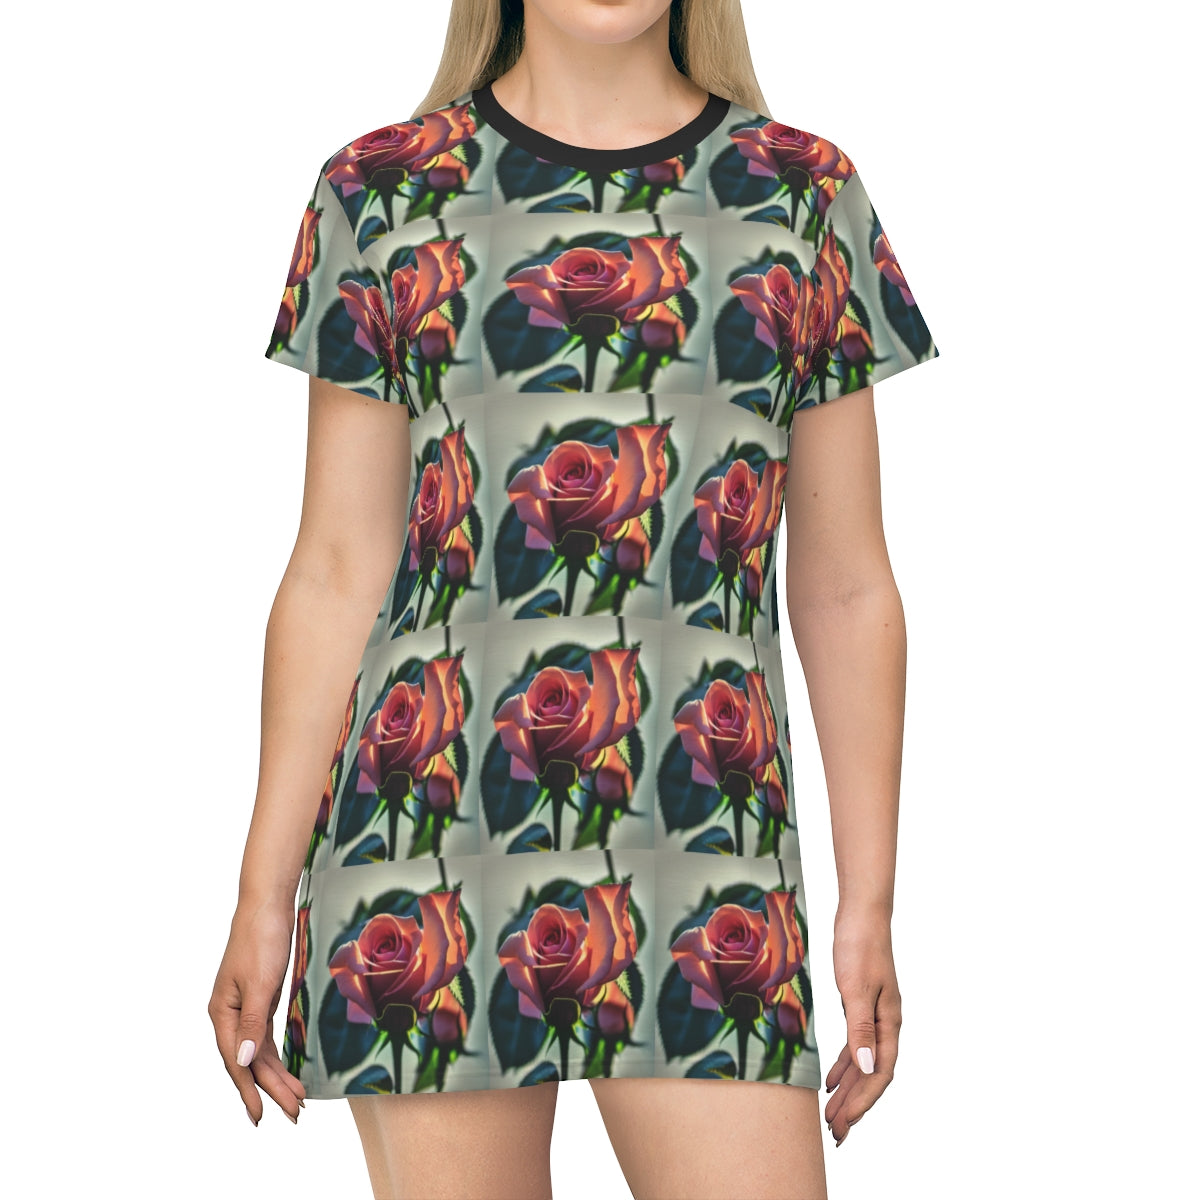 The Rose - All Over Print T-Shirt Dress